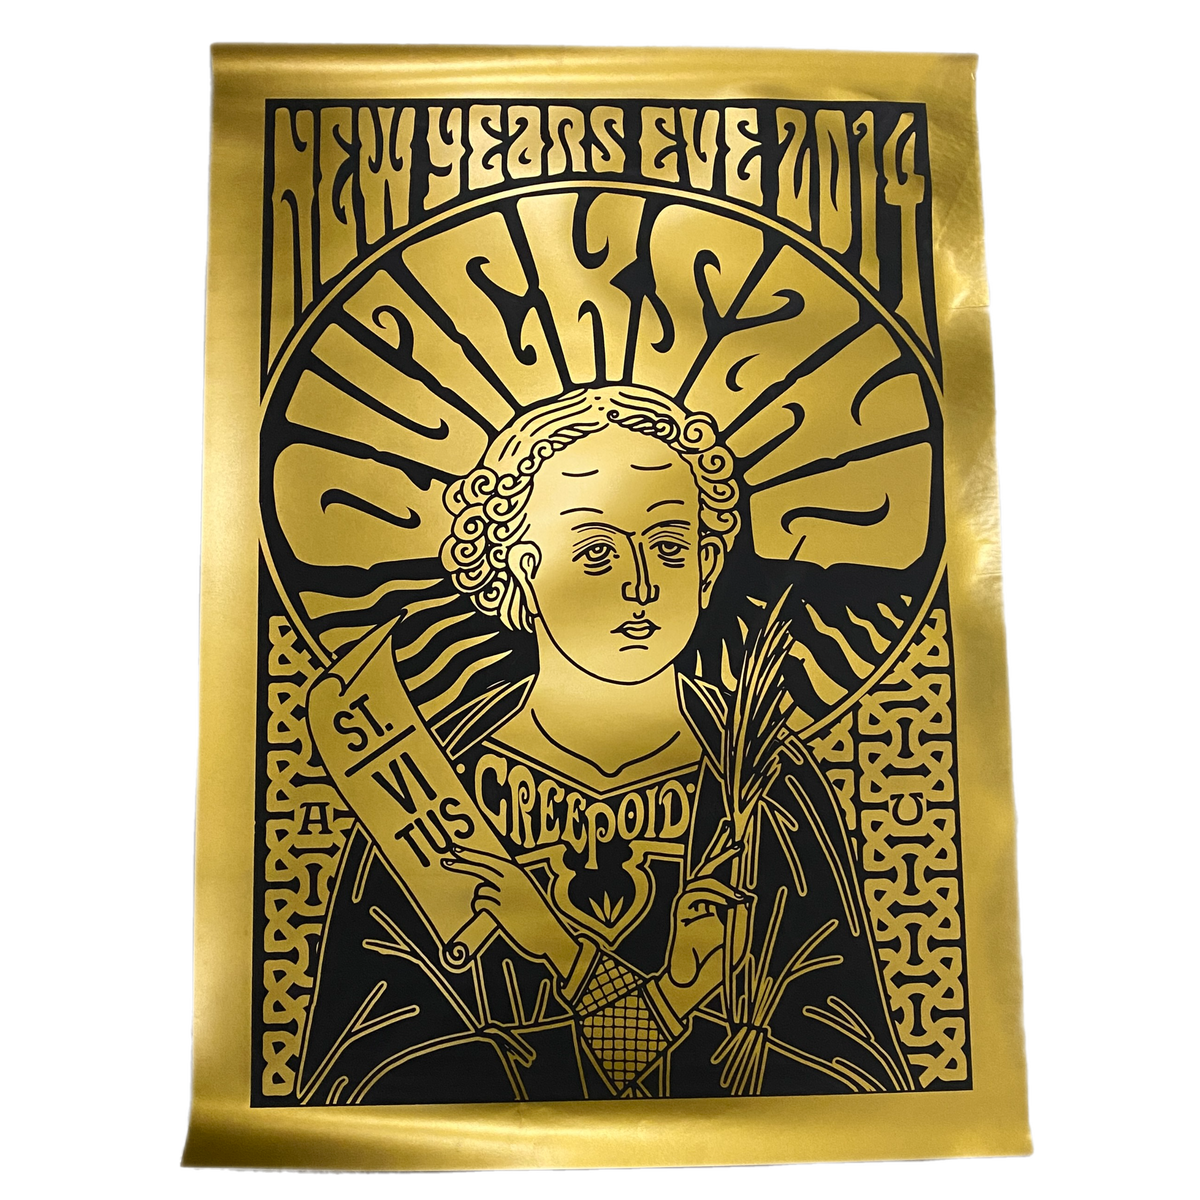 Quicksand &quot;New Years Eve 2014&quot; St. Vitus Brooklyn Poster